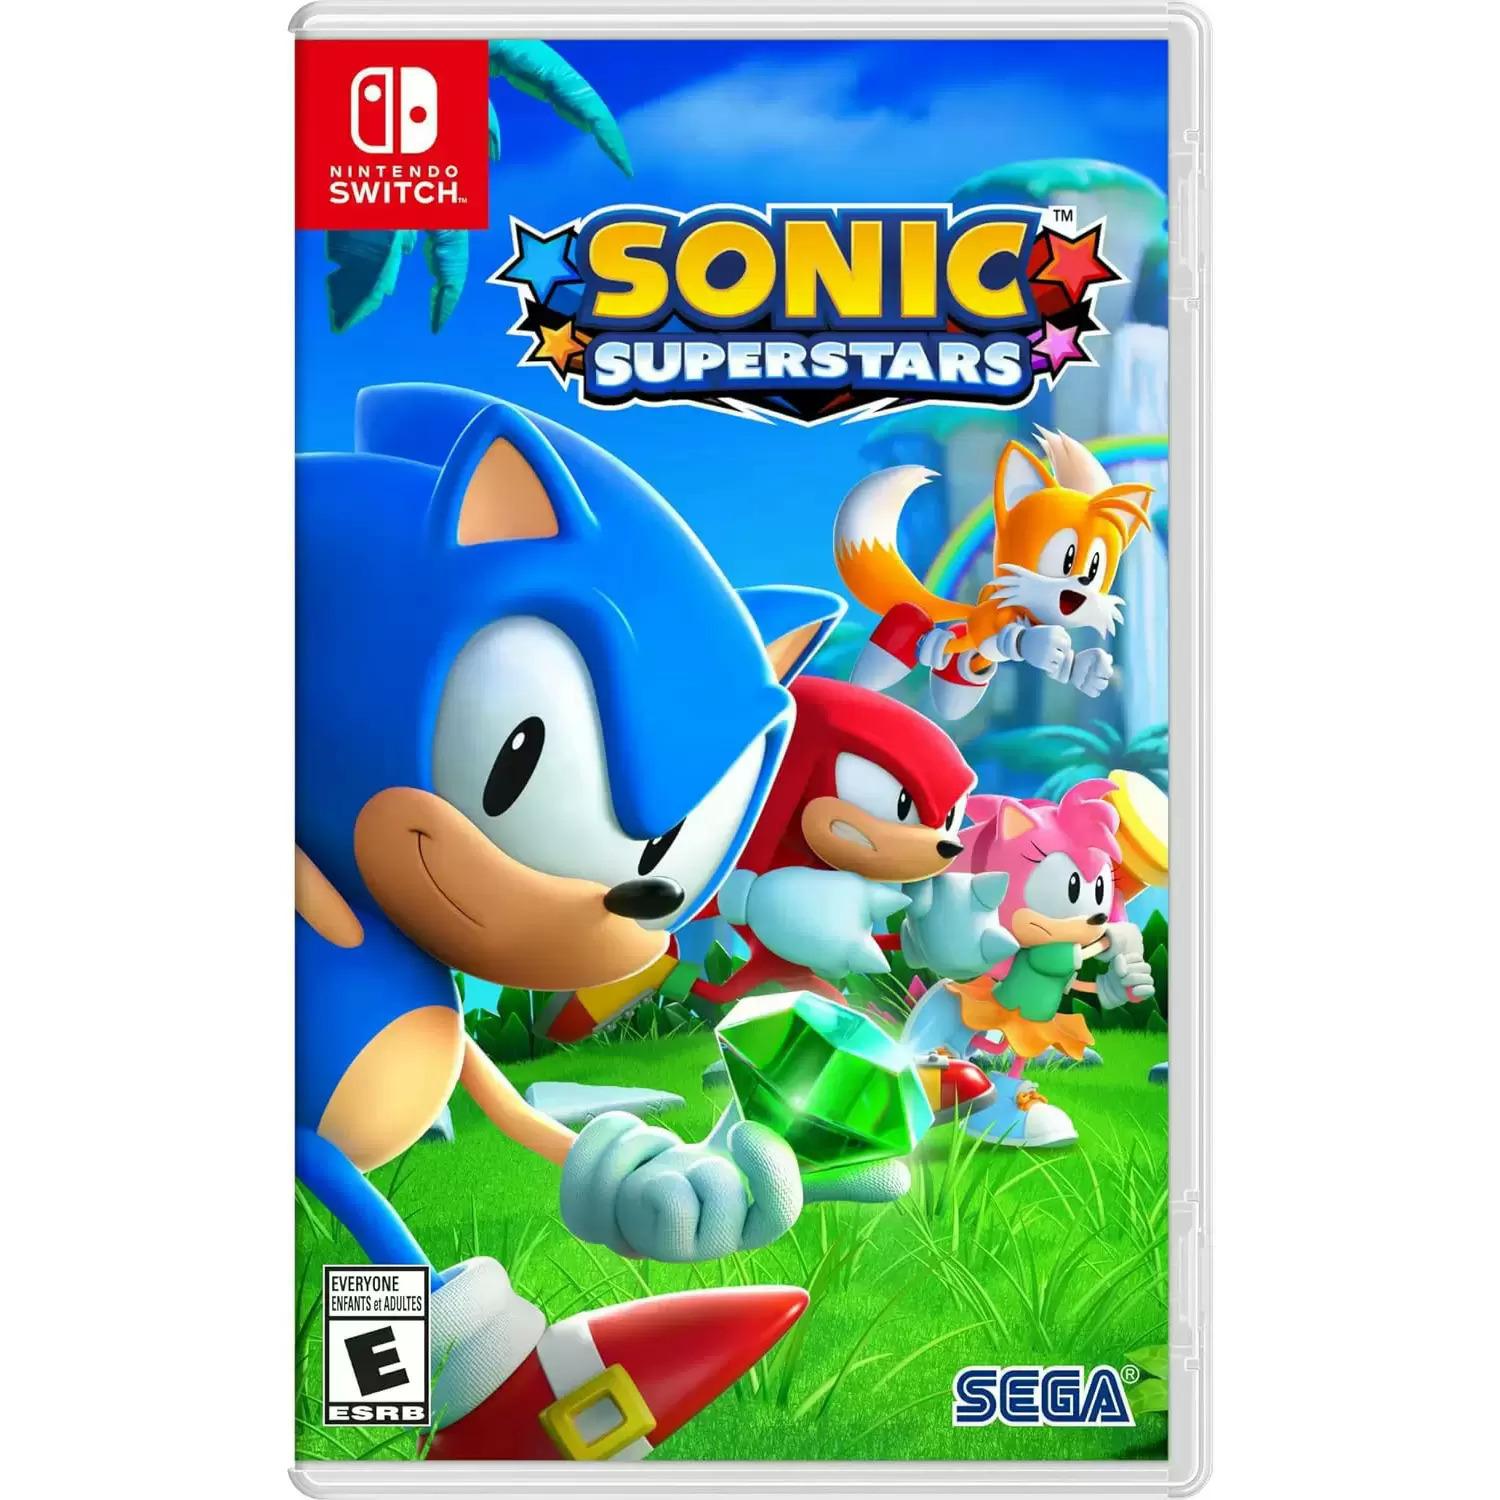 Sonic Superstars for Nintendo Switch for $29.99 Shipped